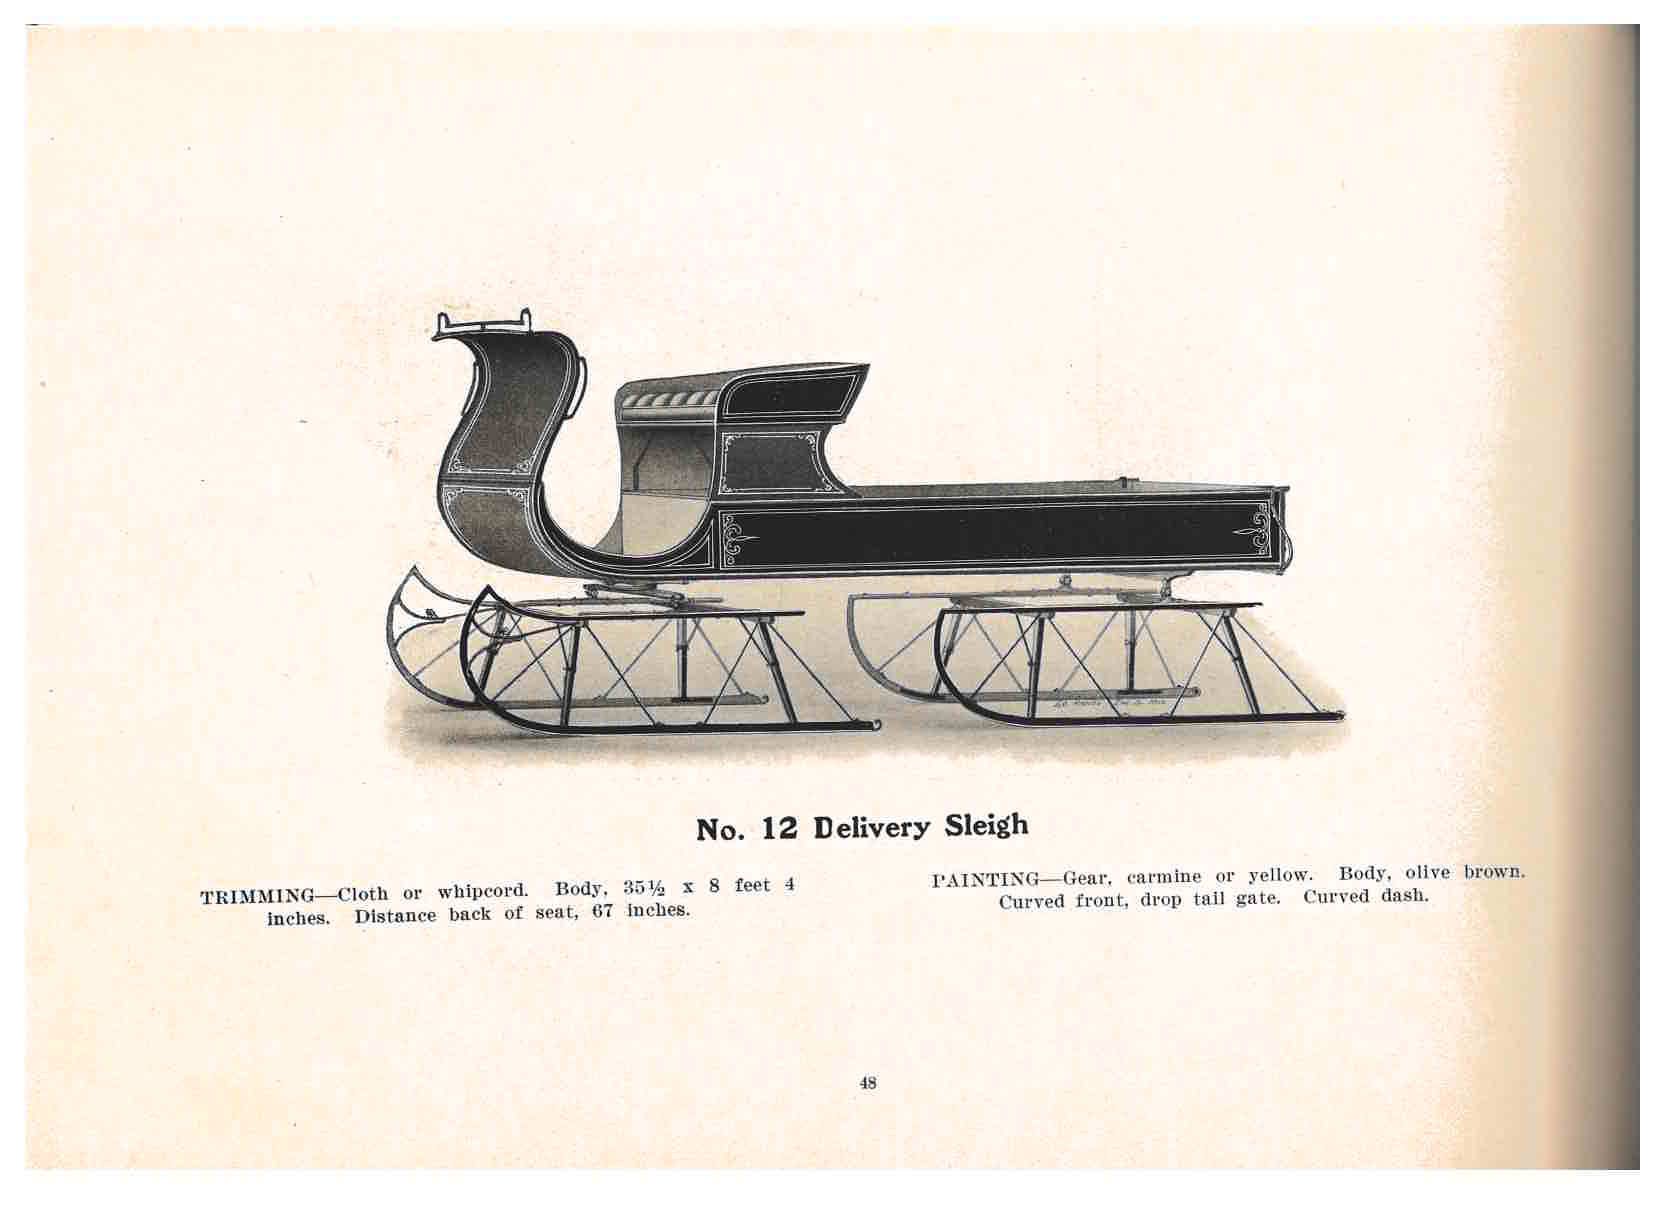 Delivery Sleigh with one seat row and storage area behind seat